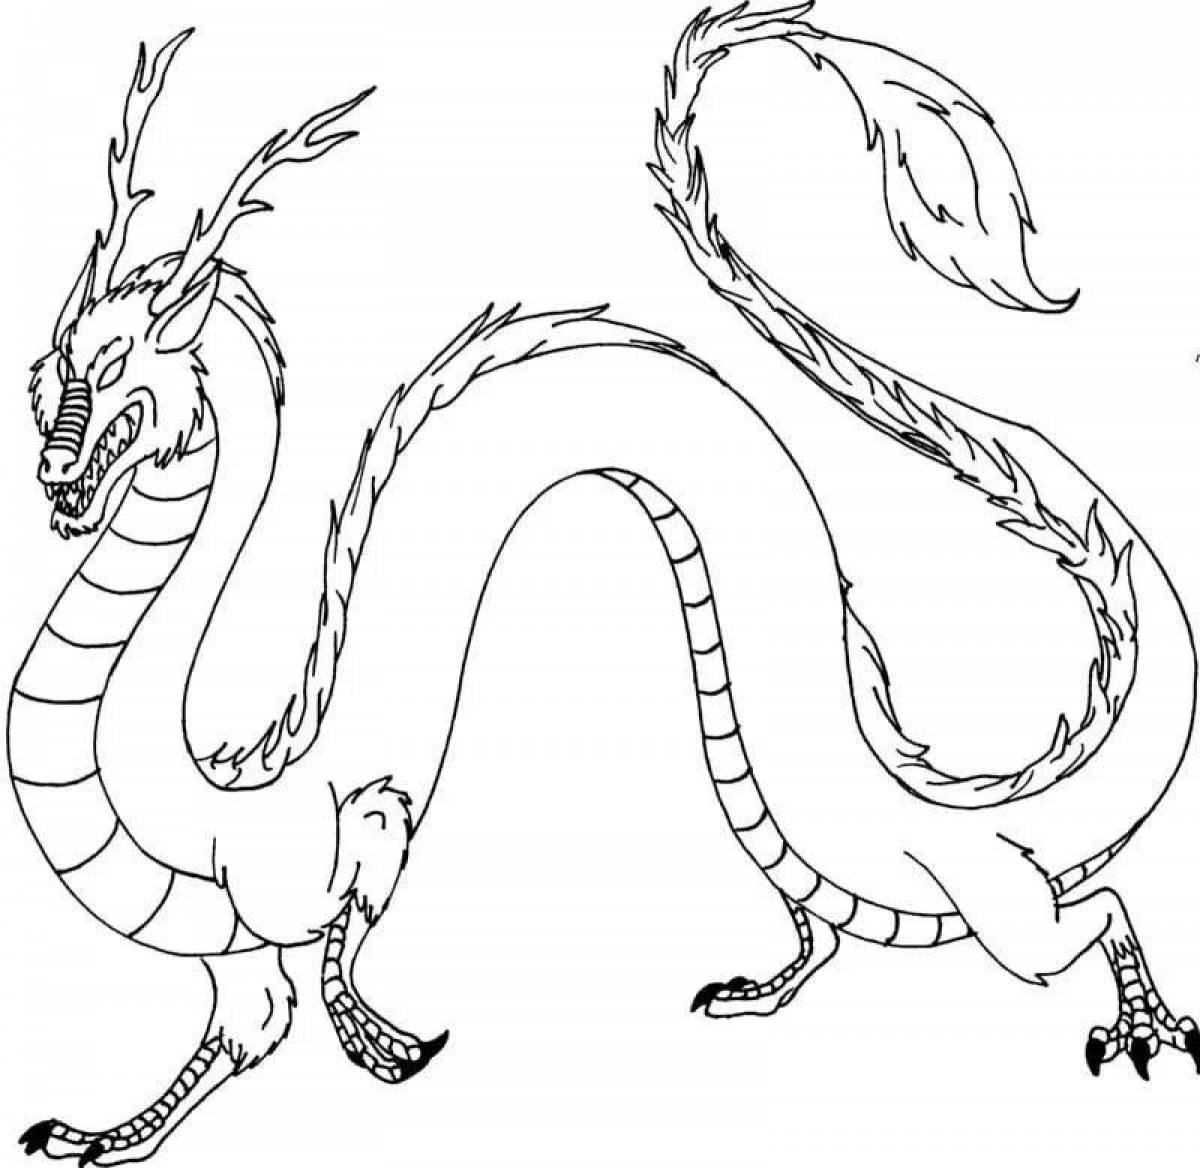 Exquisite Chinese dragon coloring book